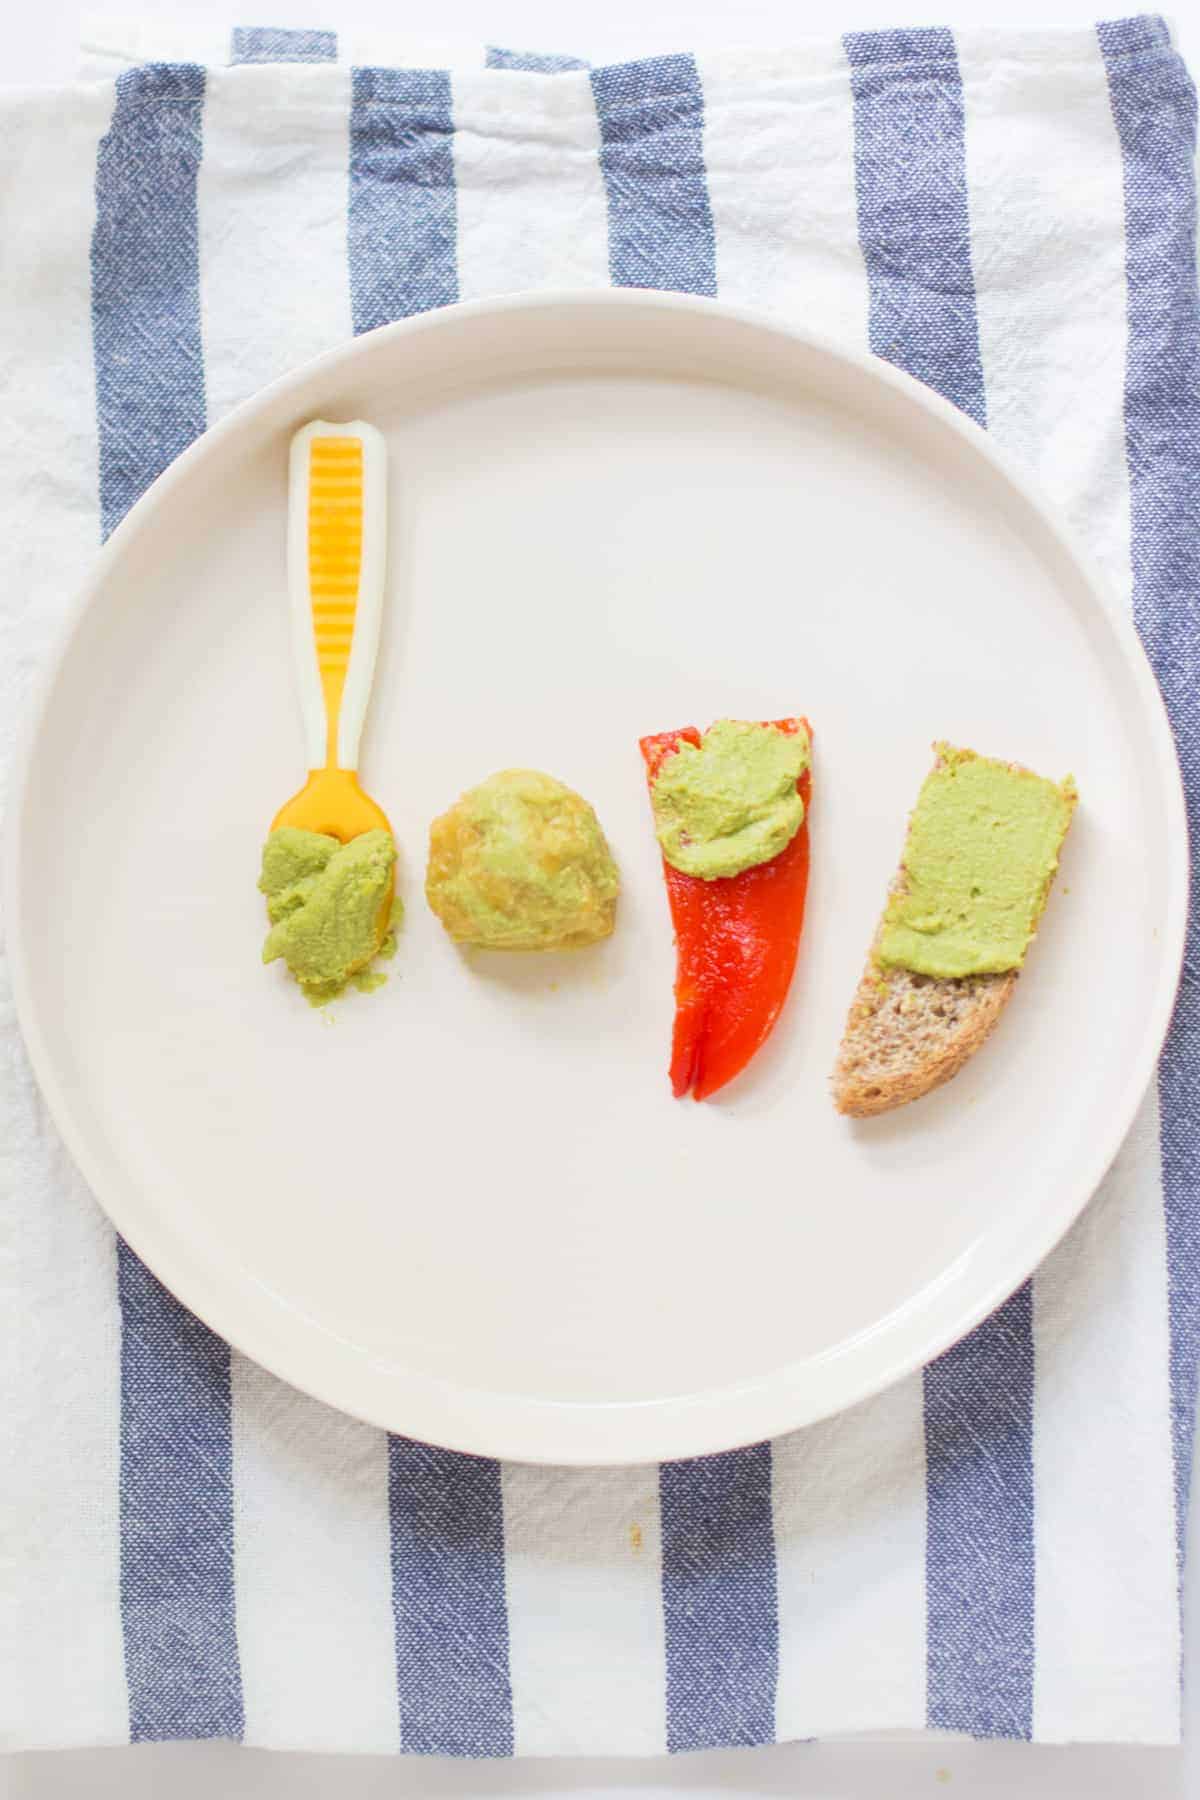 pumpkin seed spinach hummus served 4 ways - preloaded onto spoon, mixed with red lentils, spread on tip of red bell pepper and toasted bread